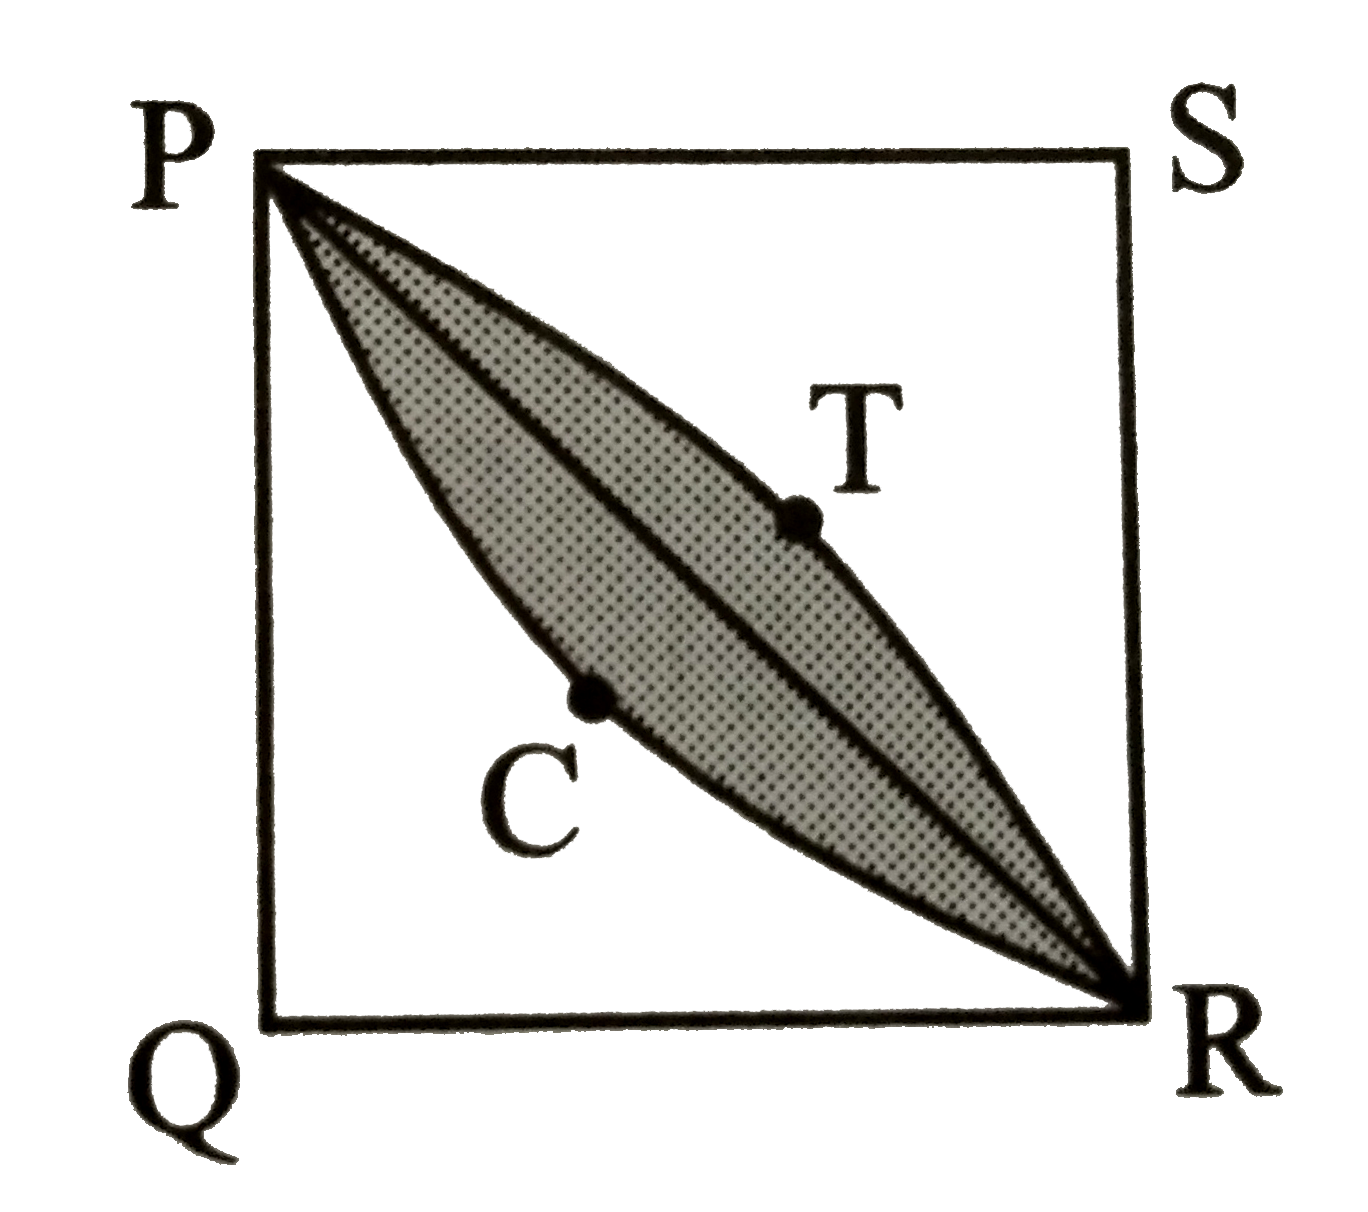 In the given figure, if squarePQRS  is a square of  side 10 cm, then find the area of the shaded region.